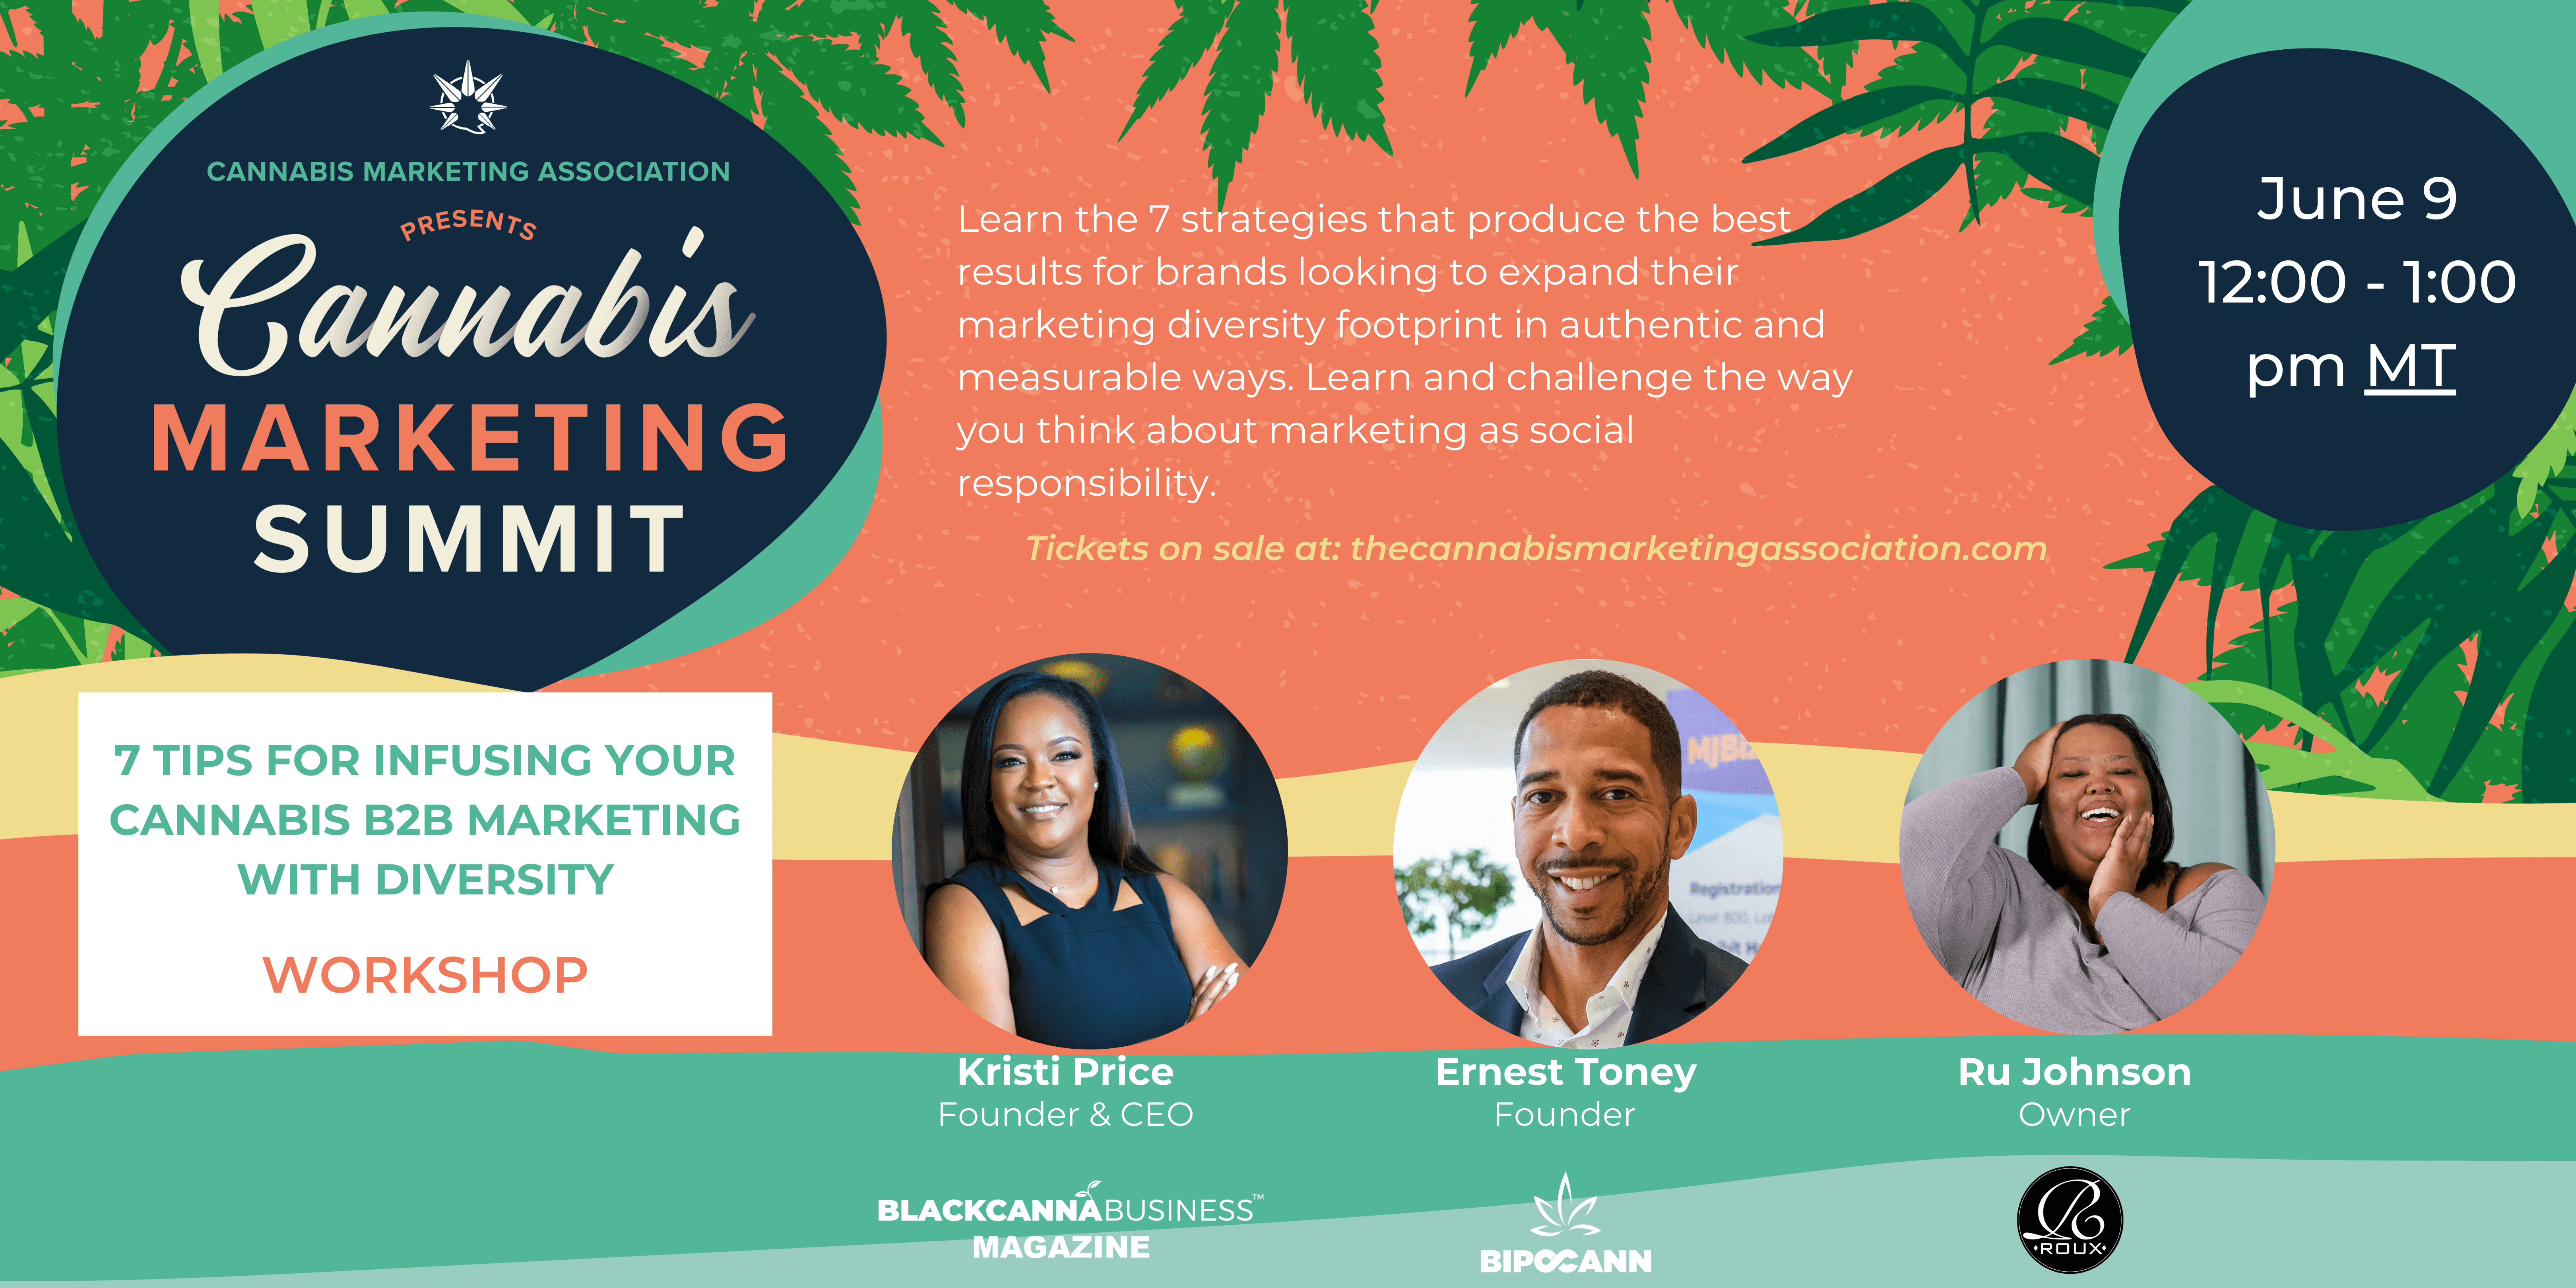 Session Spotlight:7 Tips for Infusing Your Cannabis B2B Marketing with Diversity